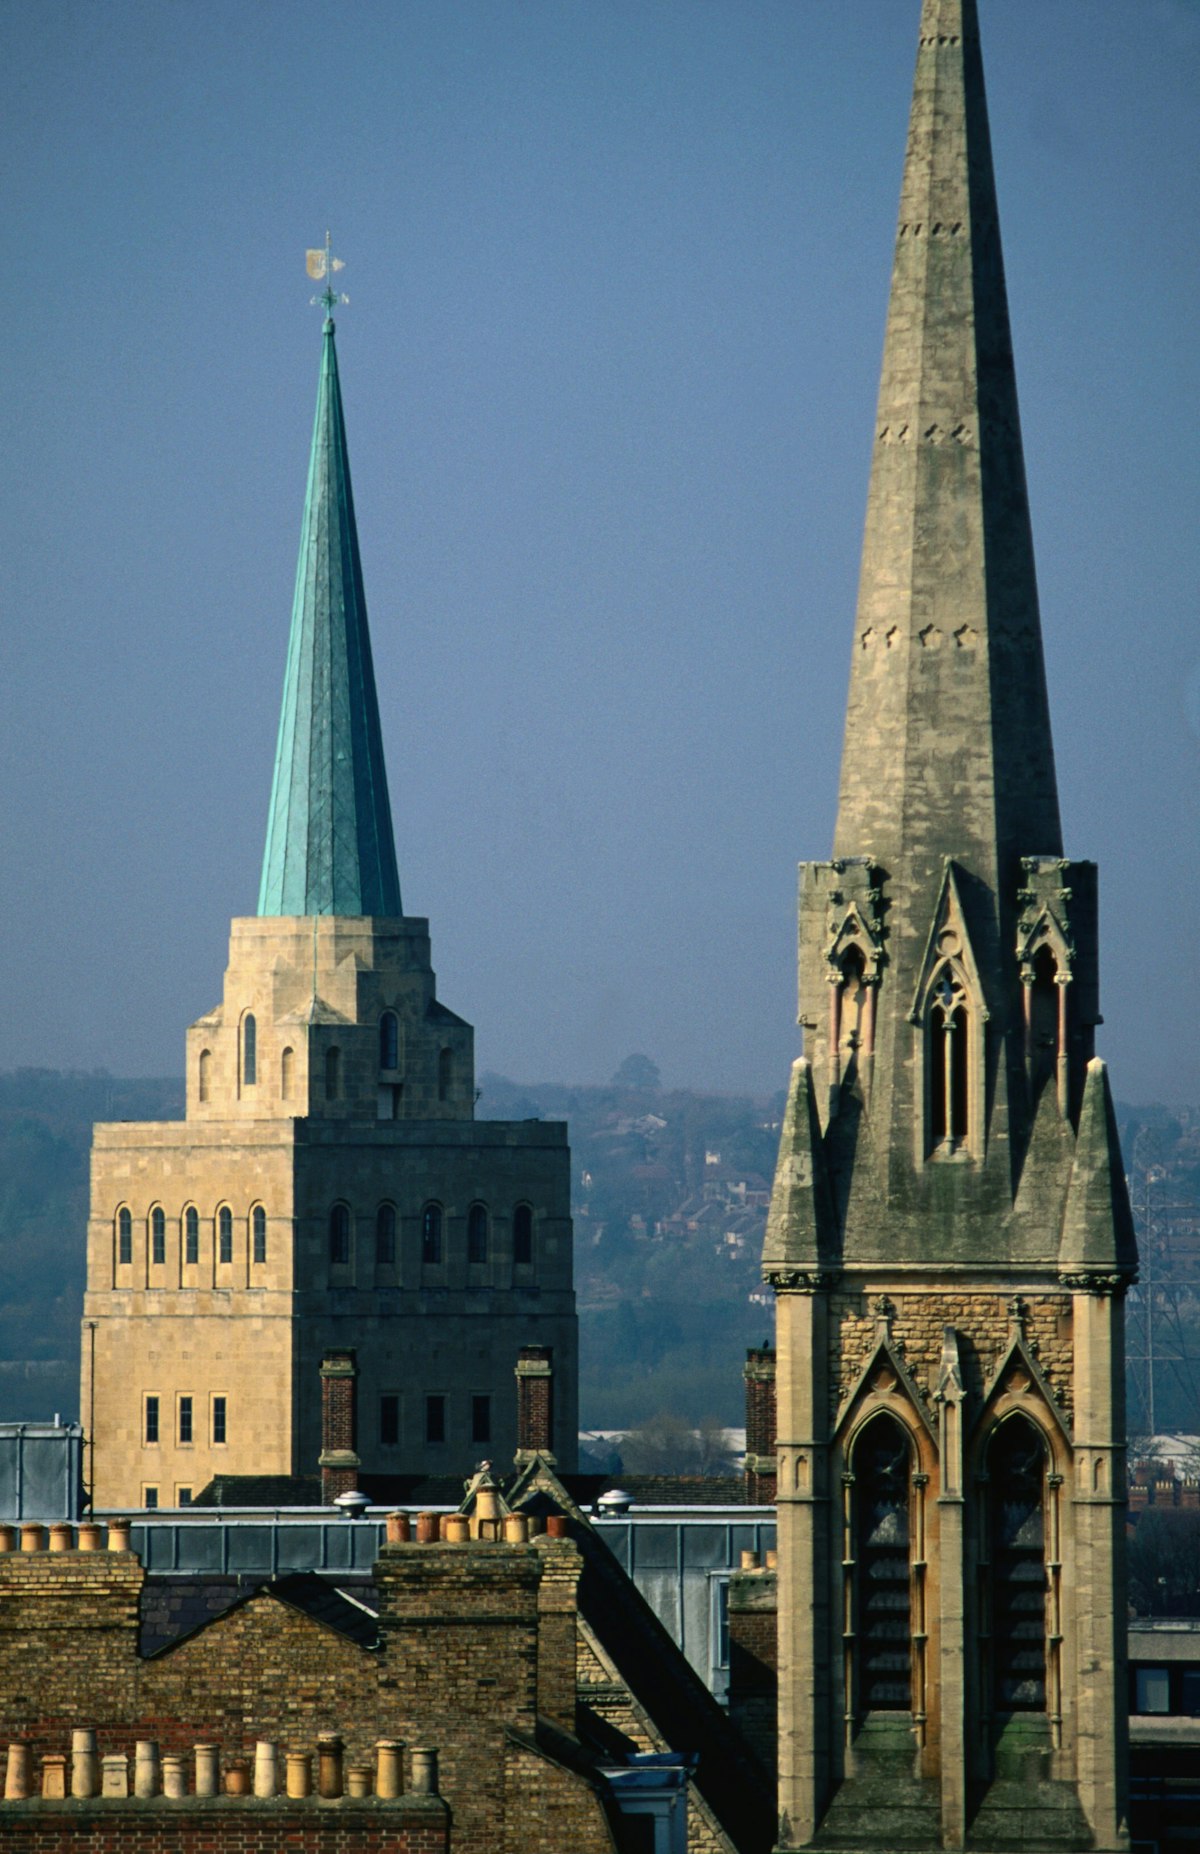 The spire of Church of St Mary the Virgin, a 14th century tower that offers great views of Oxford and Nuffield